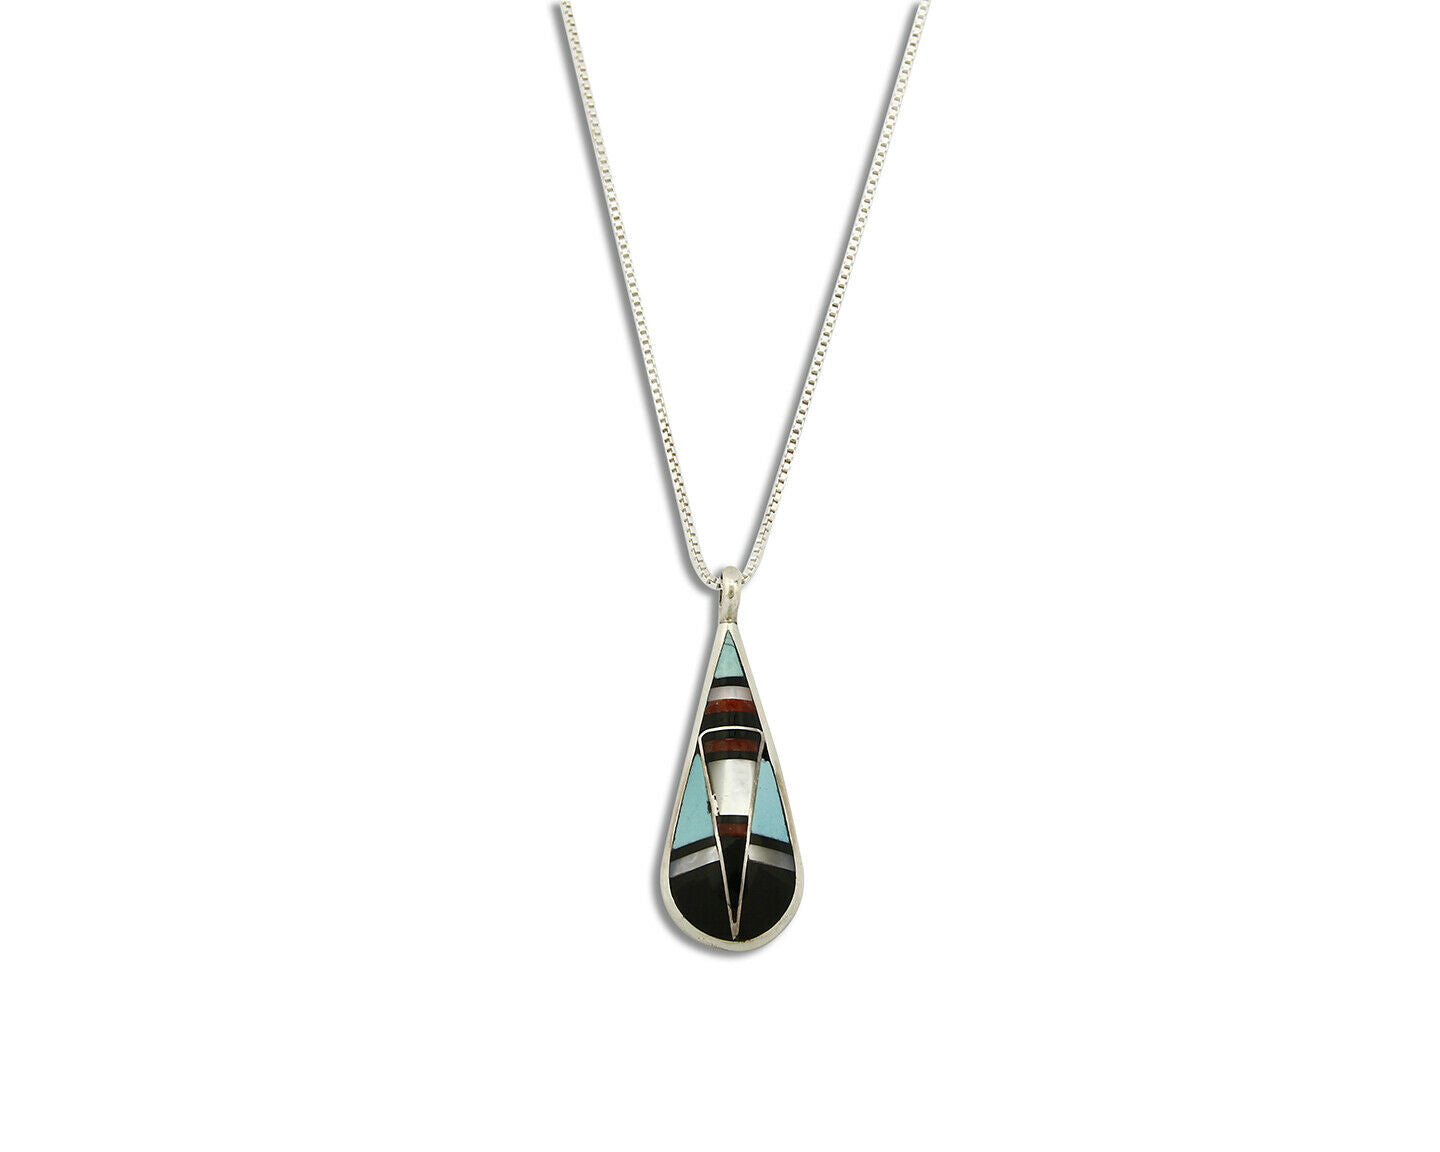 Women's Zuni Pendant .925 Silver Inlaid Gemstone Signed FP Necklace